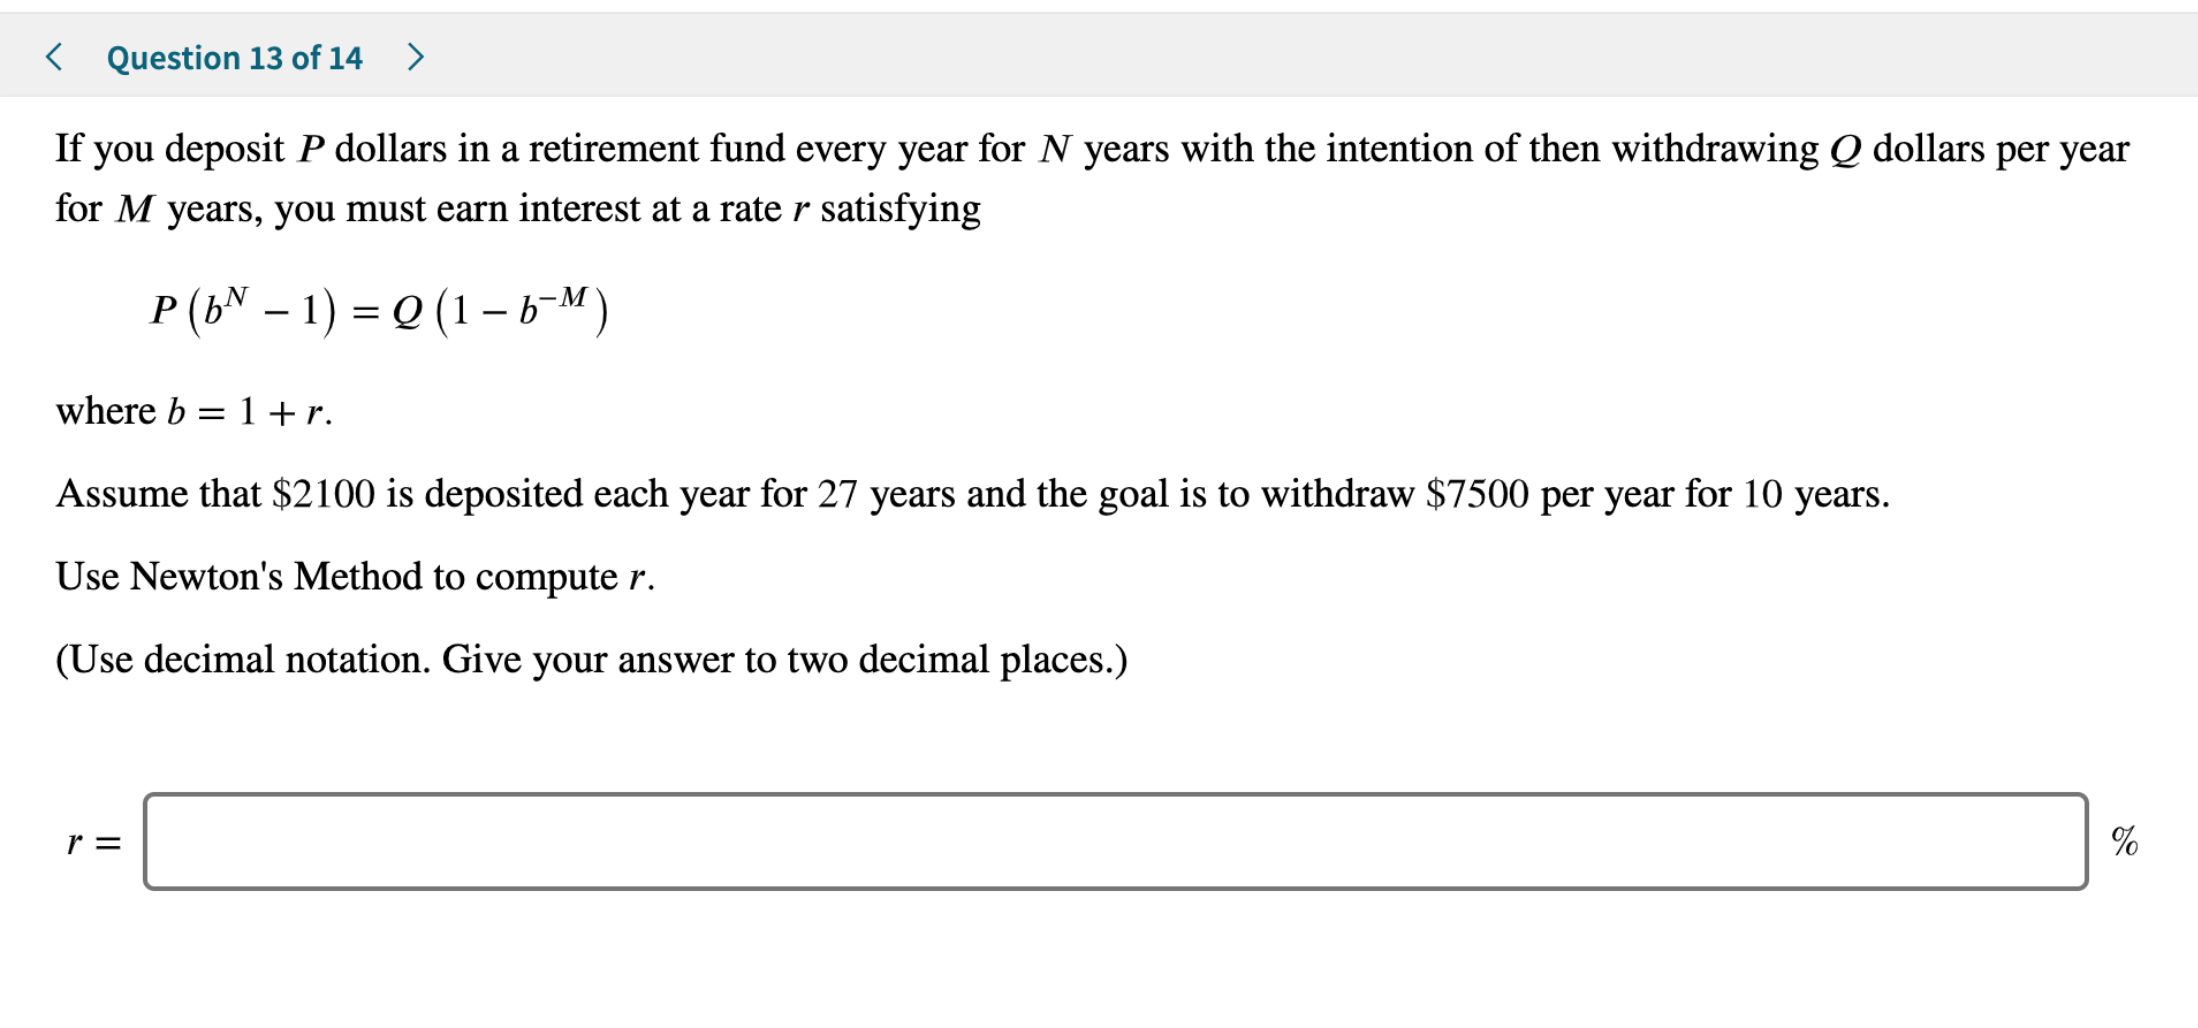 Question 13 of 14
>
If you deposit P dollars in a retirement fund every year for N years with the intention of then withdrawing Q dollars per year
for M years, you must earn interest at a rater satisfying
P (bN - 1)
(1-b-M)
where b 1 + r
Assume that $2100 is deposited each year for 27 years and the goal is to withdraw $7500 per year for 10 years
Use Newton's Method to compute r.
(Use decimal notation. Give your answer to two decimal places.)
r =
96
